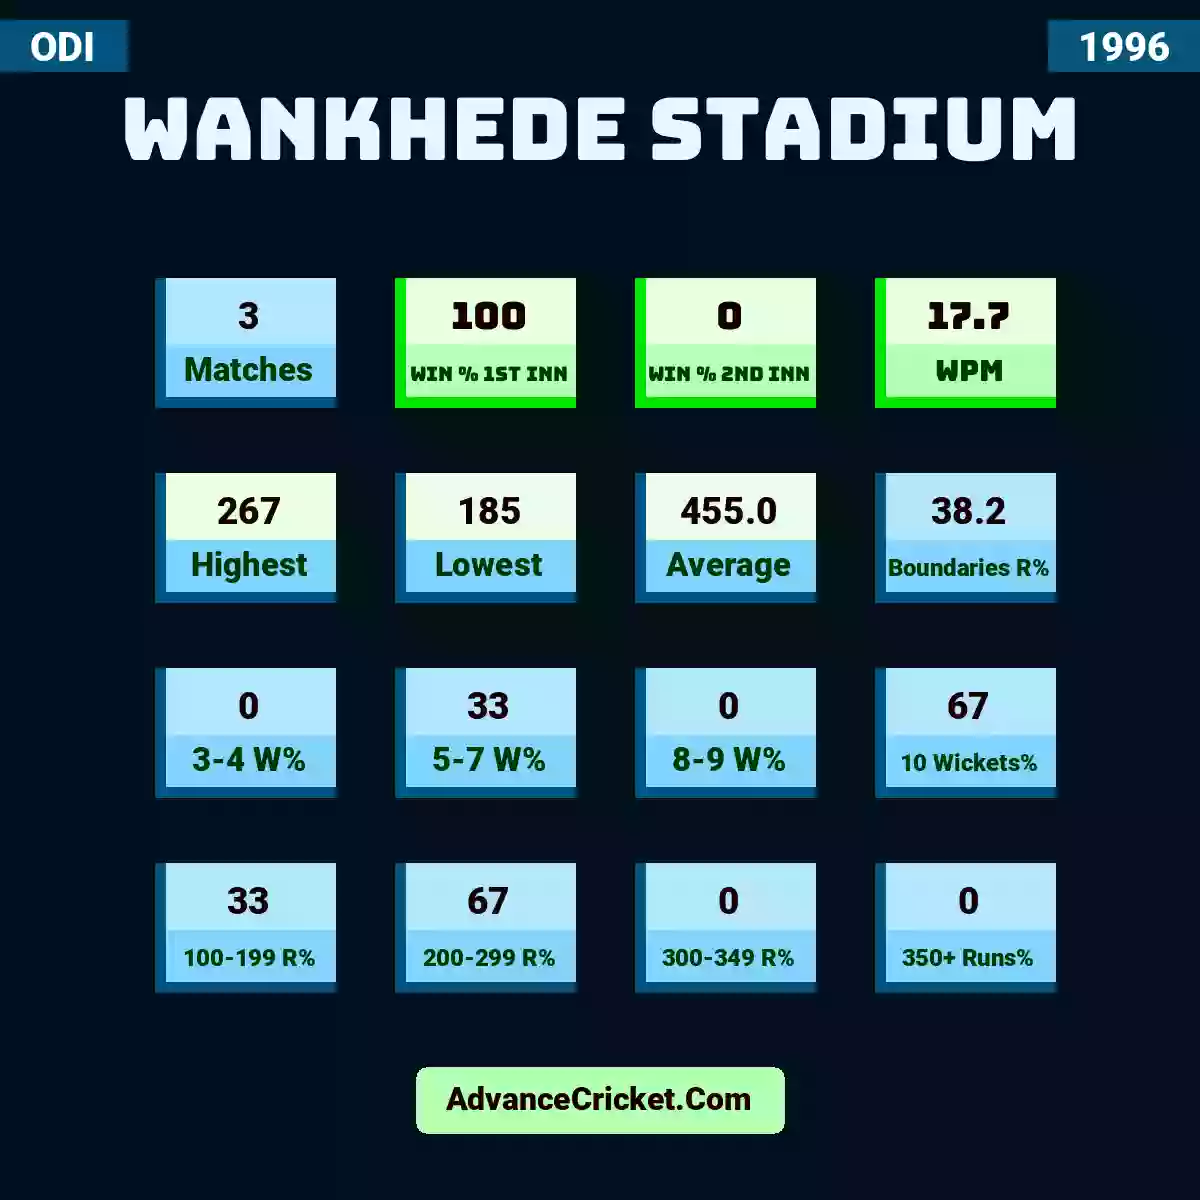 Image showing Wankhede Stadium with Matches: 3, Win % 1st Inn: 100, Win % 2nd Inn: 0, WPM: 17.7, Highest: 267, Lowest: 185, Average: 455.0, Boundaries R%: 38.2, 3-4 W%: 0, 5-7 W%: 33, 8-9 W%: 0, 10 Wickets%: 67, 100-199 R%: 33, 200-299 R%: 67, 300-349 R%: 0, 350+ Runs%: 0.